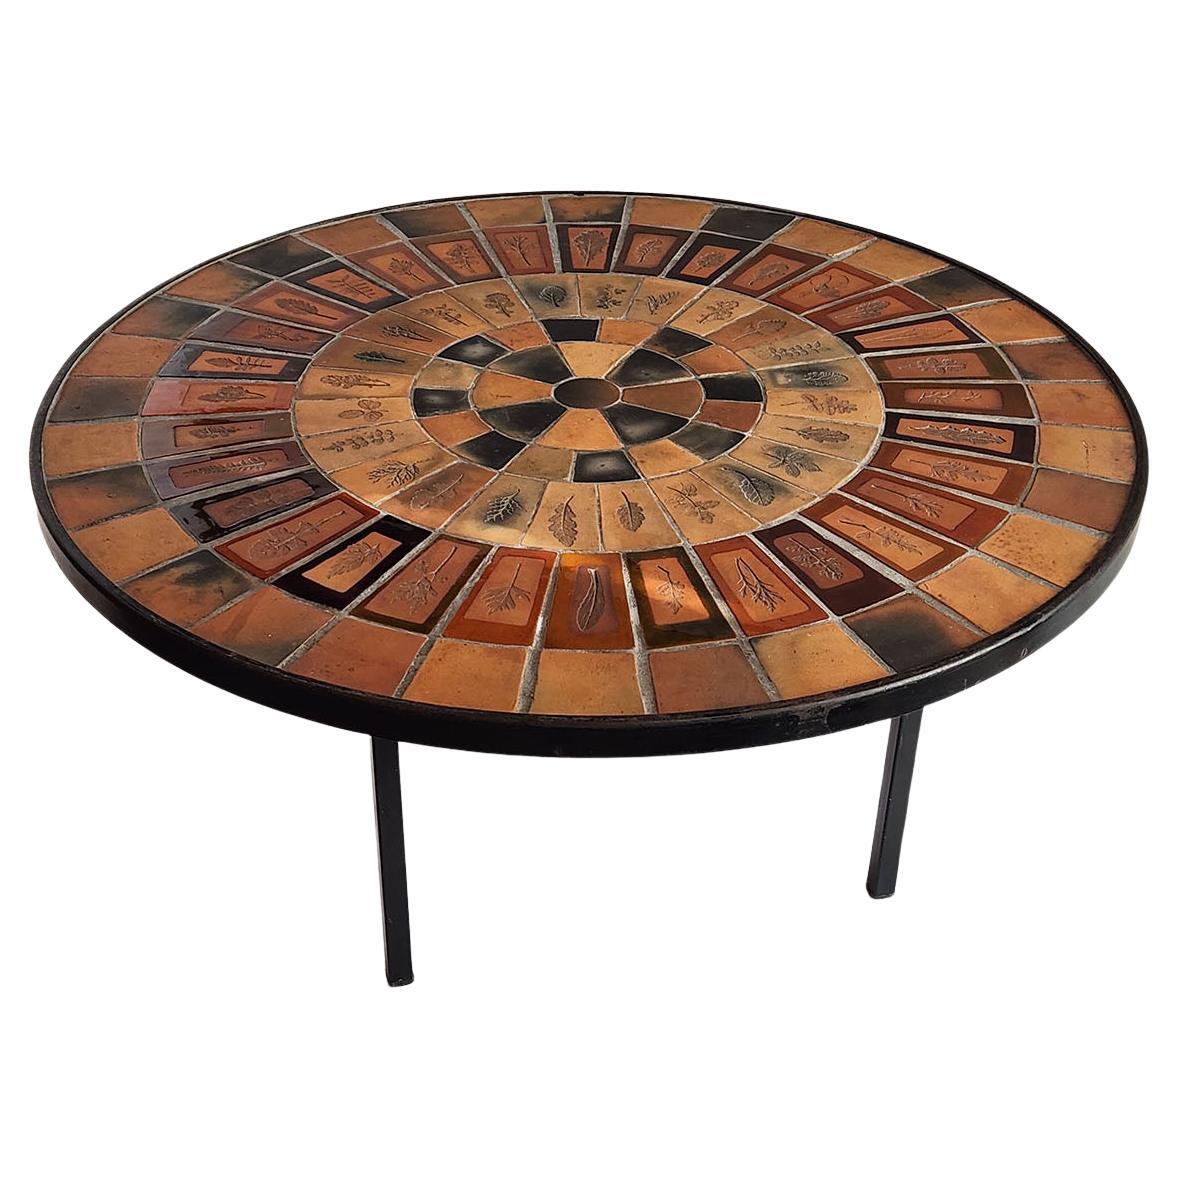 Roger Capron - Round Ceramic Coffee Table with Herbier tiles on Metal Frame